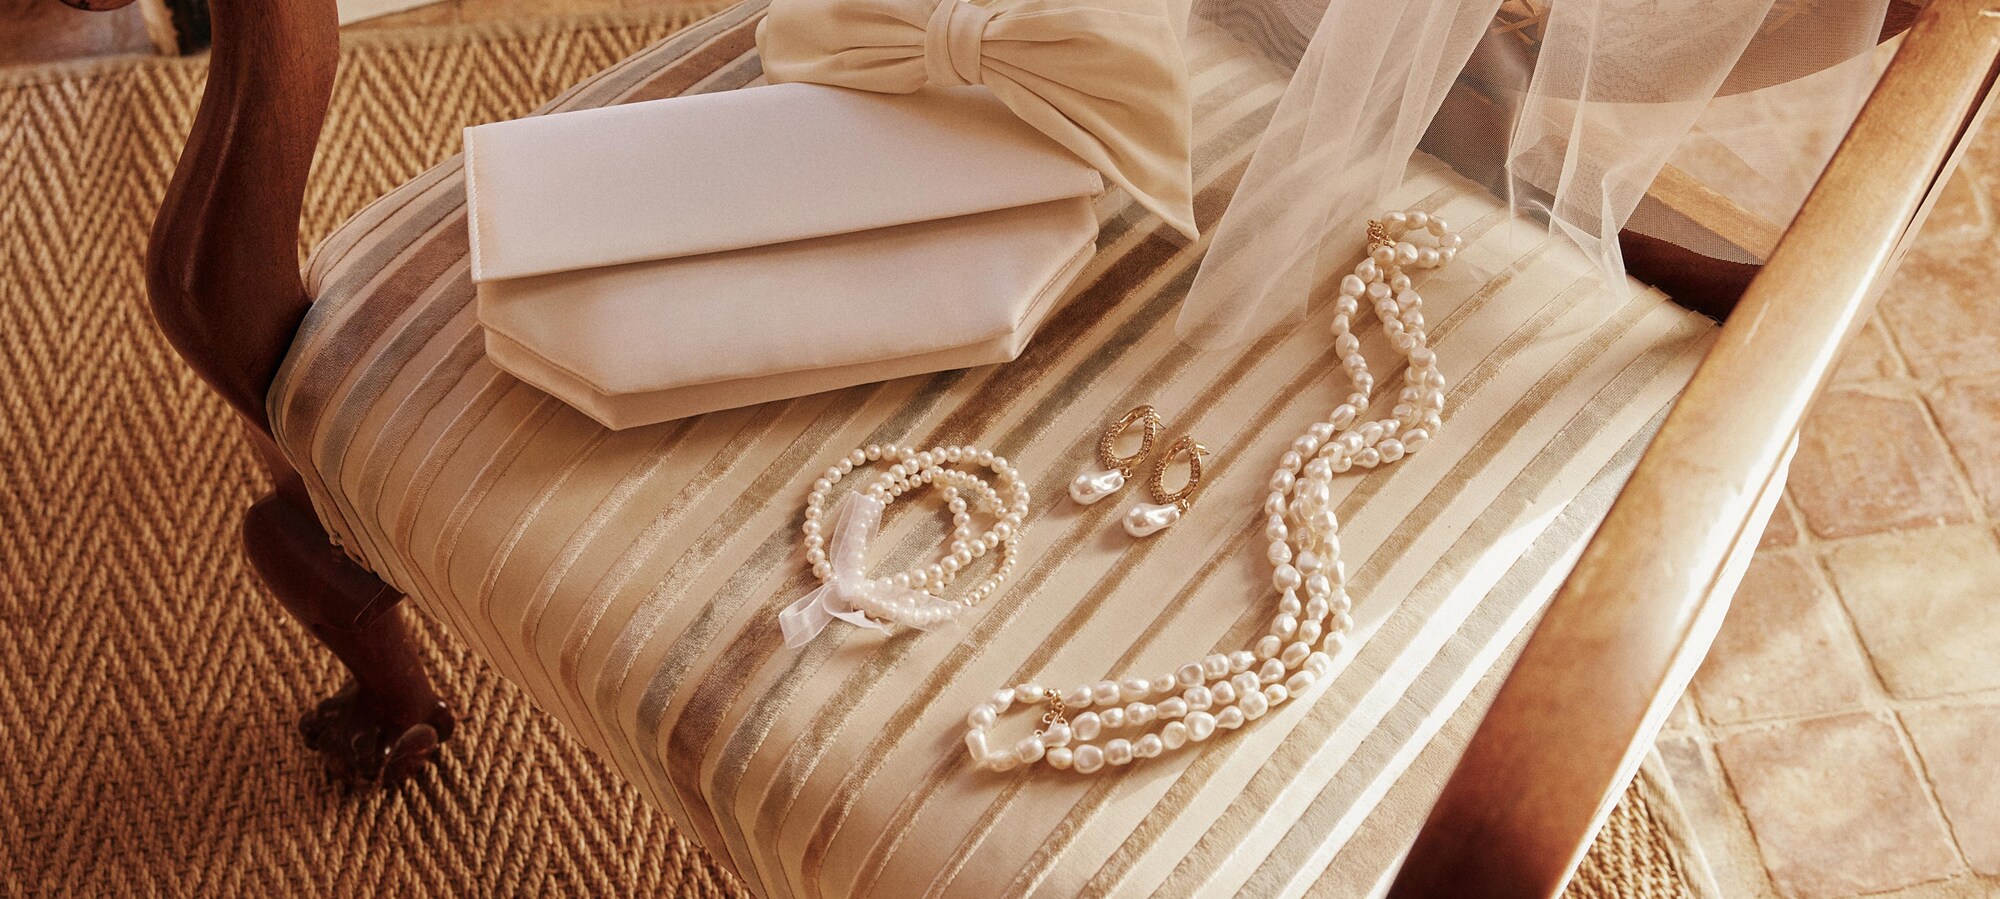 Your finishing touches Bridal accessories with style